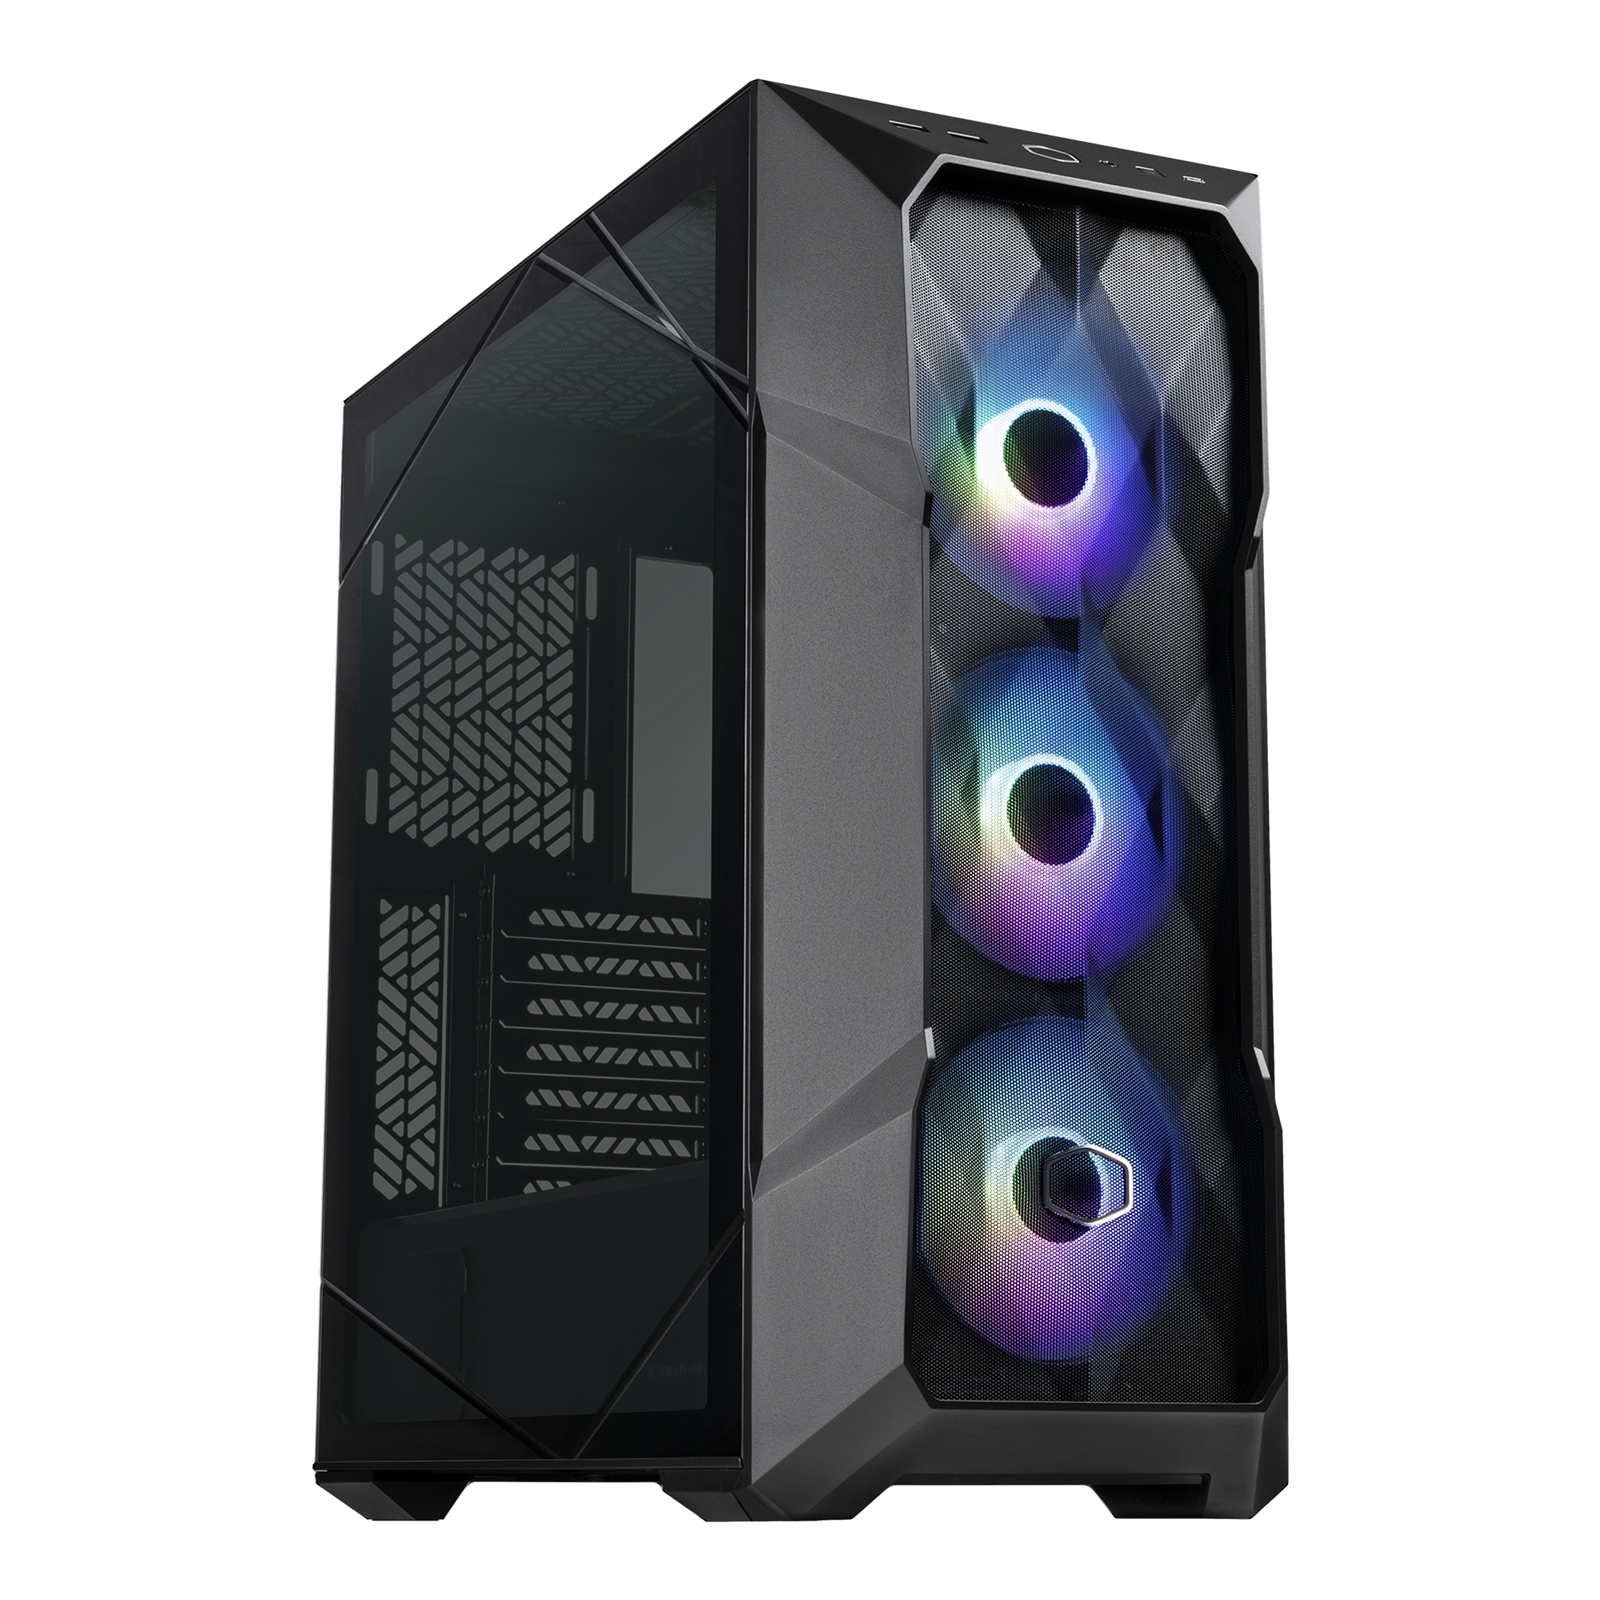 COOLER MASTER MasterBox TD500 Mesh V2 Case, Black, Mid Tower, 2 x USB 3.2 Gen 1 Type-A / 1 x USB 3.2 Gen 2 Type-C, Tool-Free Crystalline Tempered Glass Side Panel with Polygonal FineMesh Front Panel, 3 x CF120 Addressable RGB Fans Included with ARGB & Fan